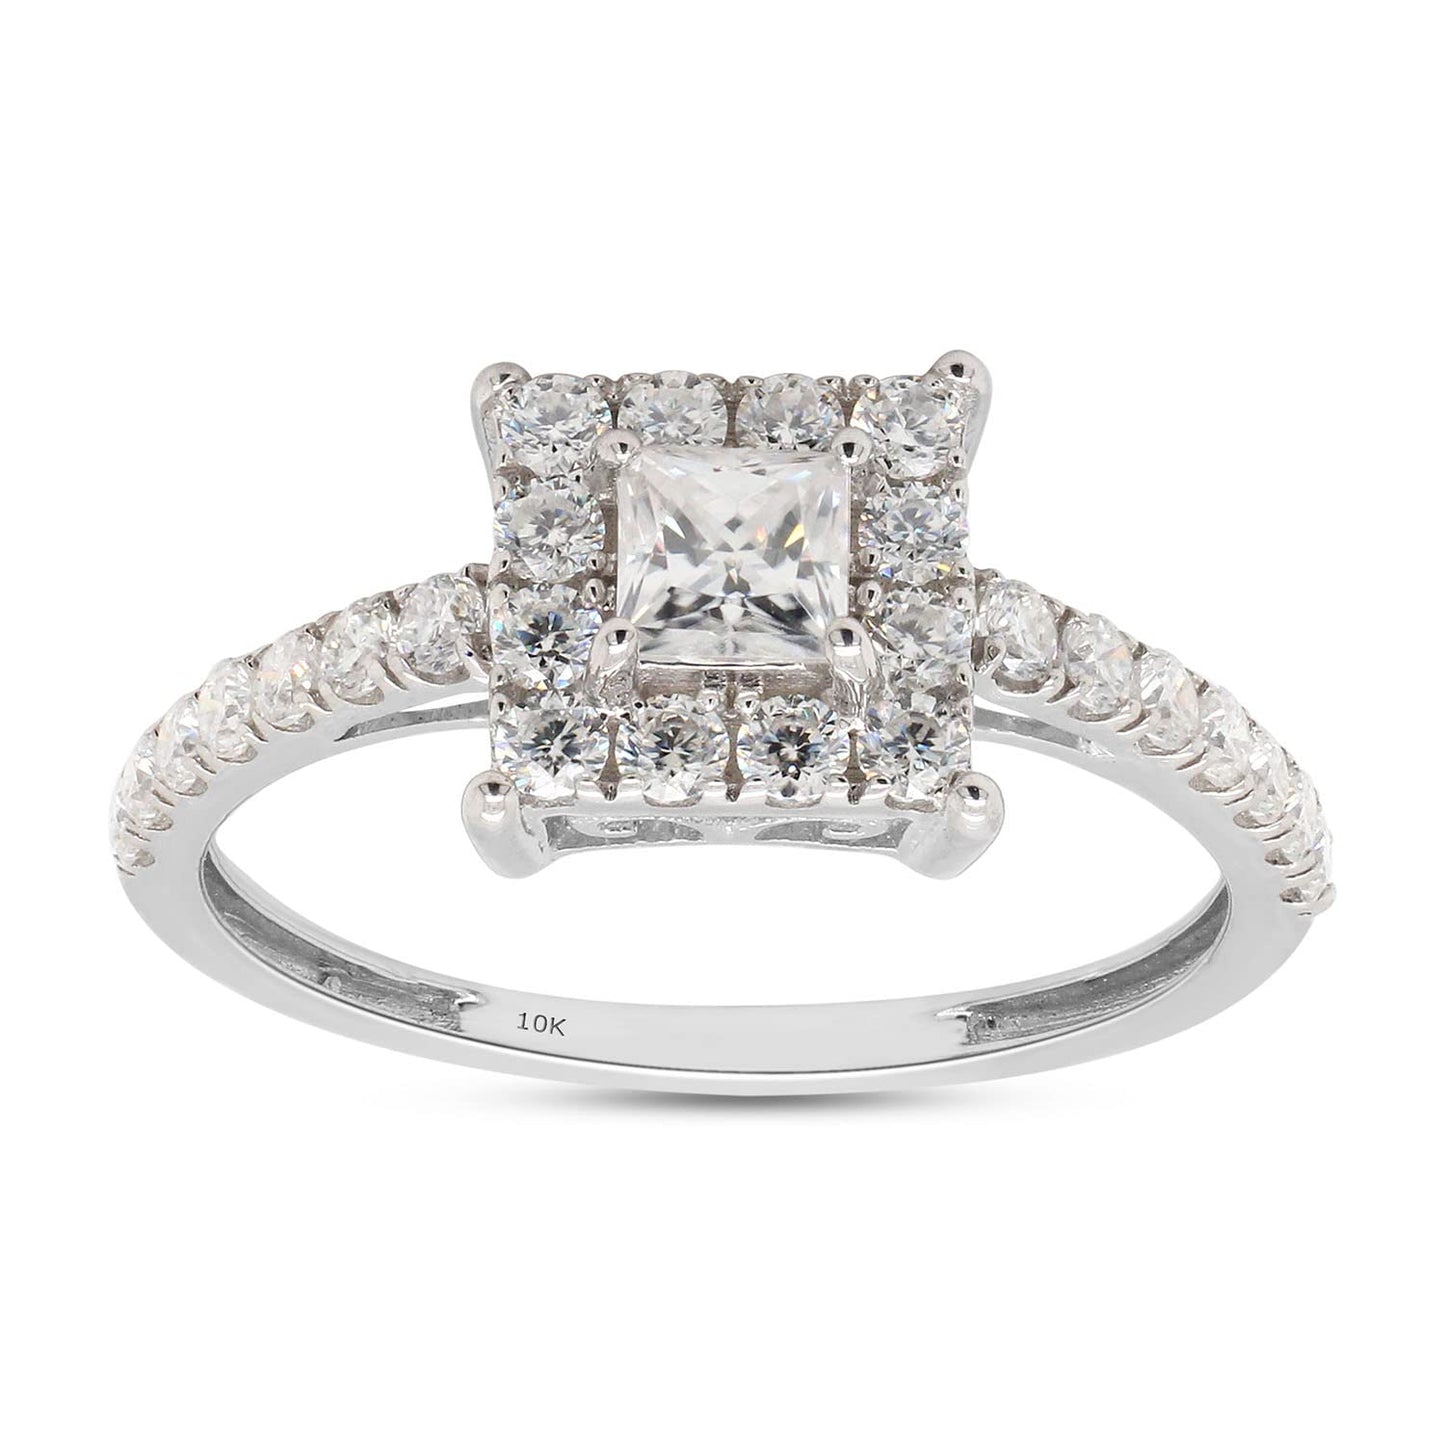 0.75 Carat Princess and Round Cut Lab Created Moissanite Diamond Square Halo Engagement Ring in 10K or 14K Solid Gold